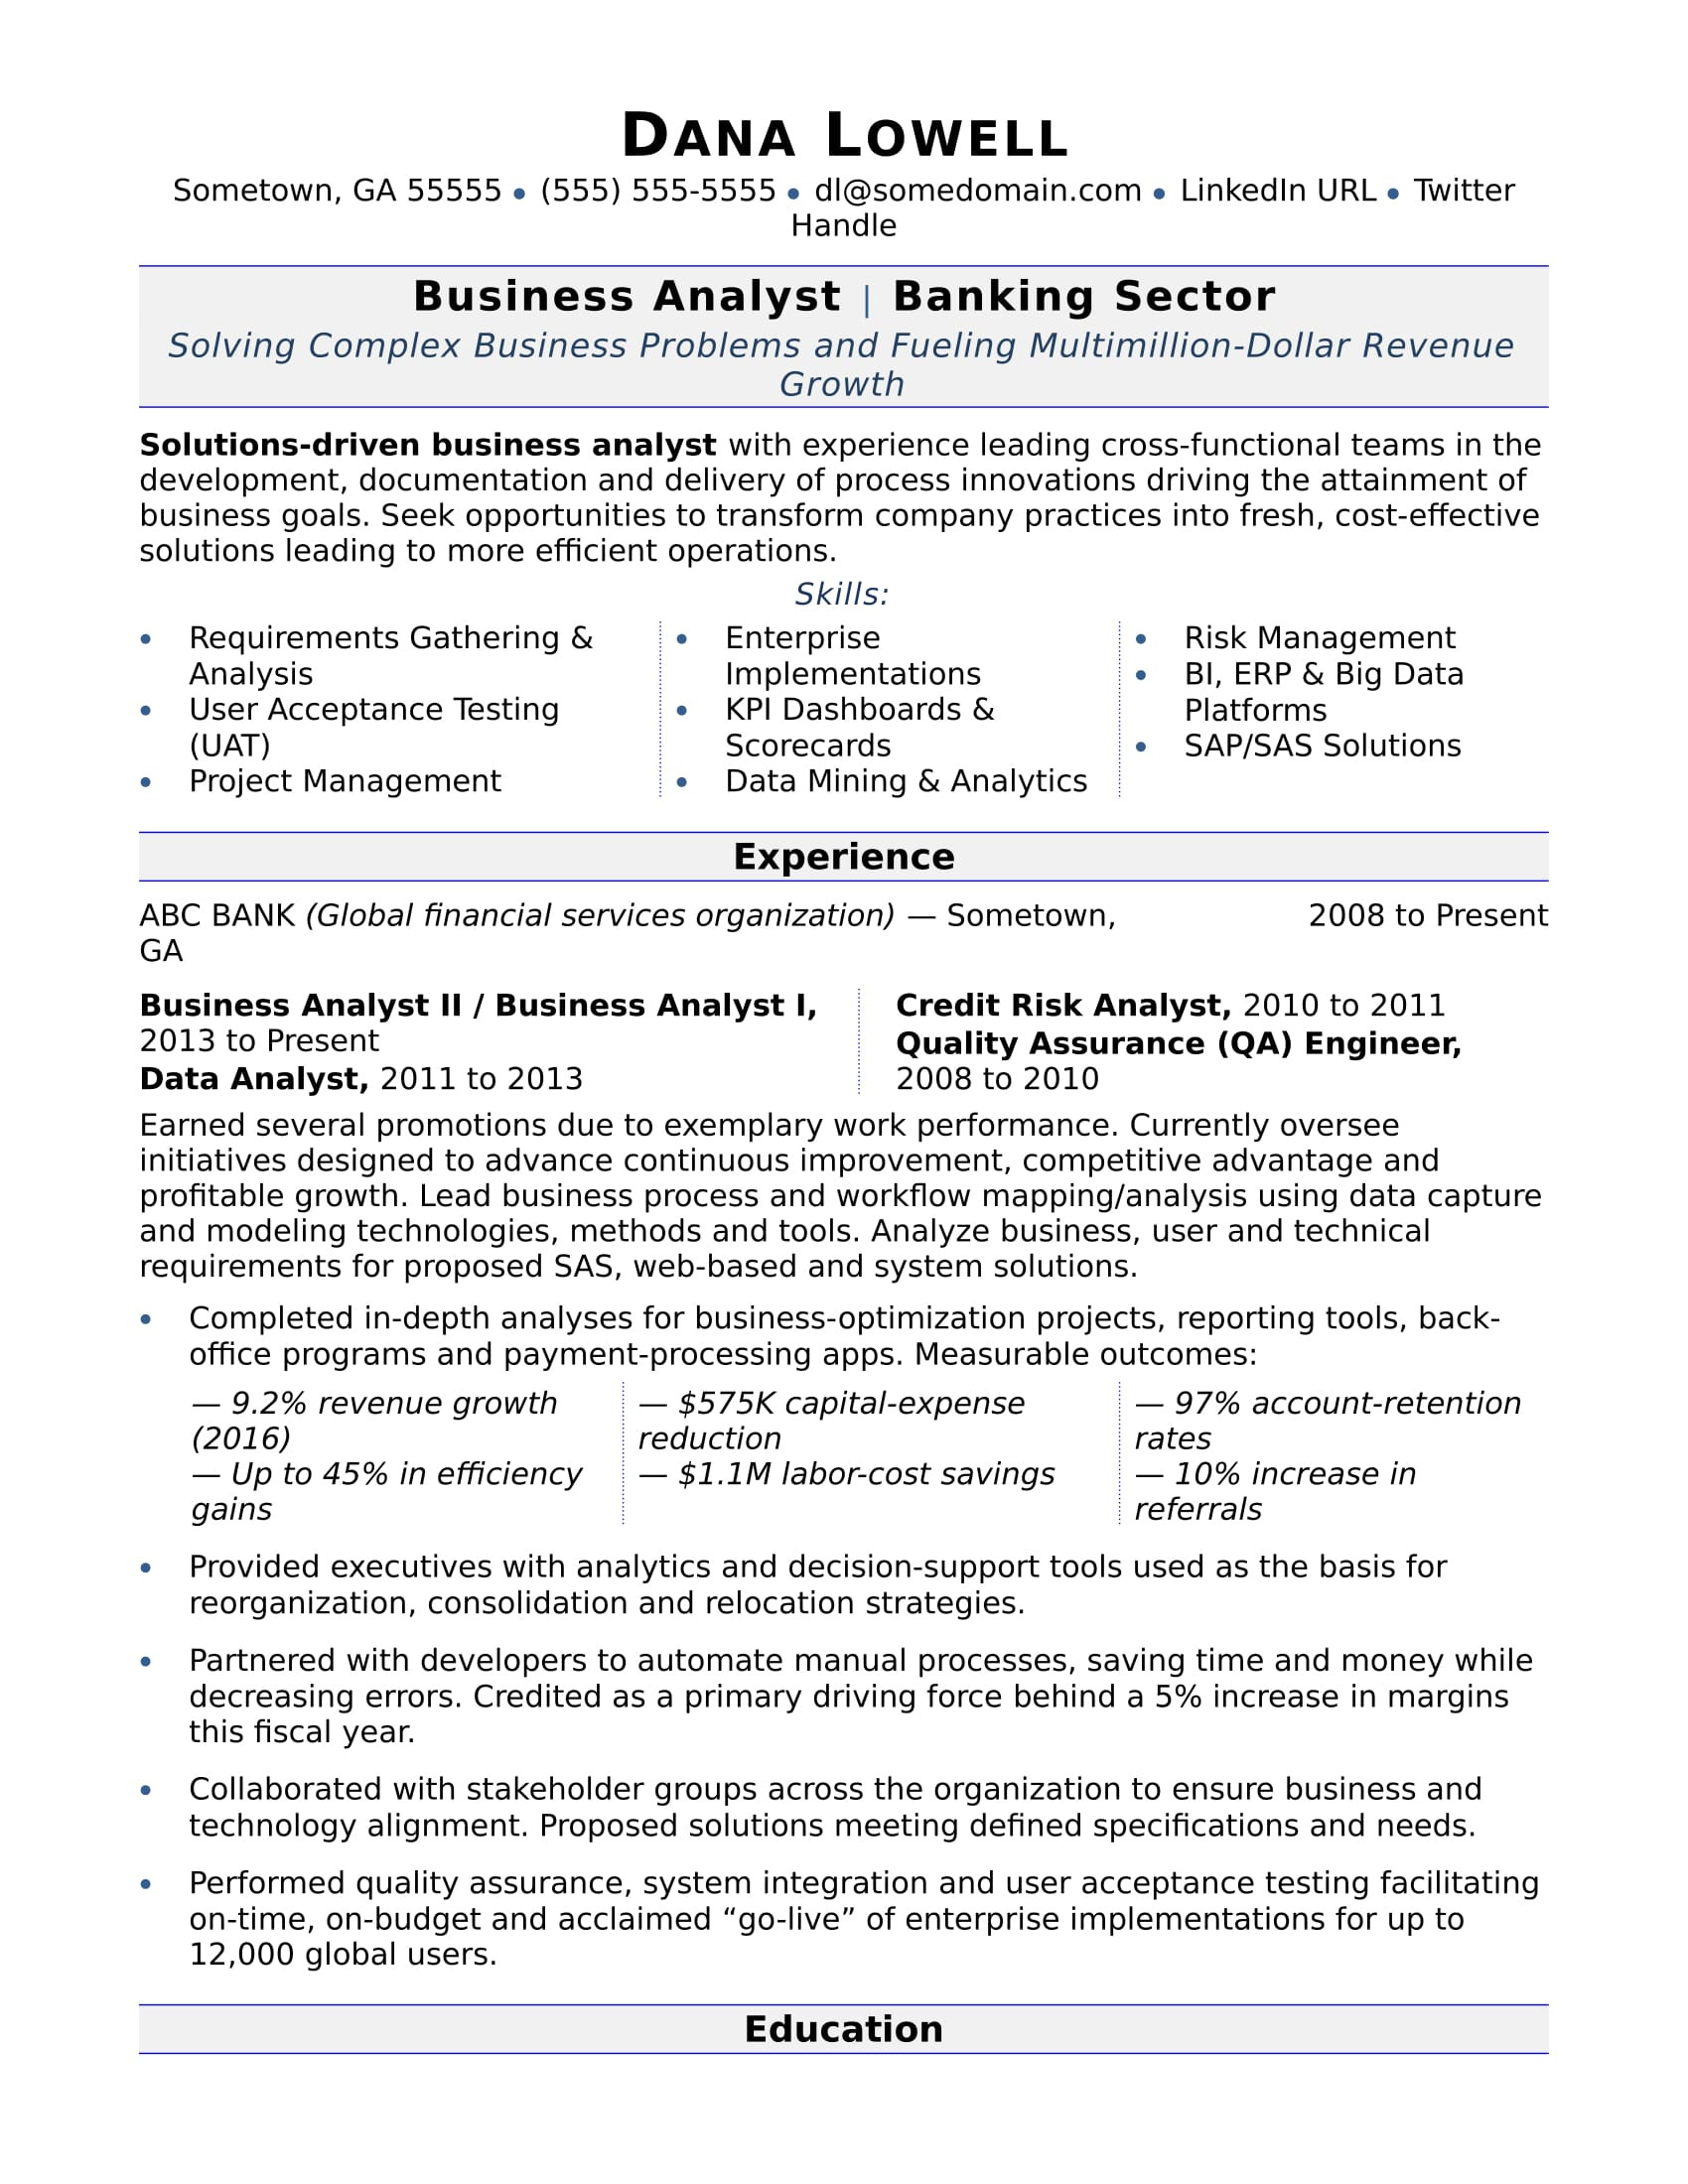 Free Sample Of Business Analyst Resume Business Analyst Resume Monster.com